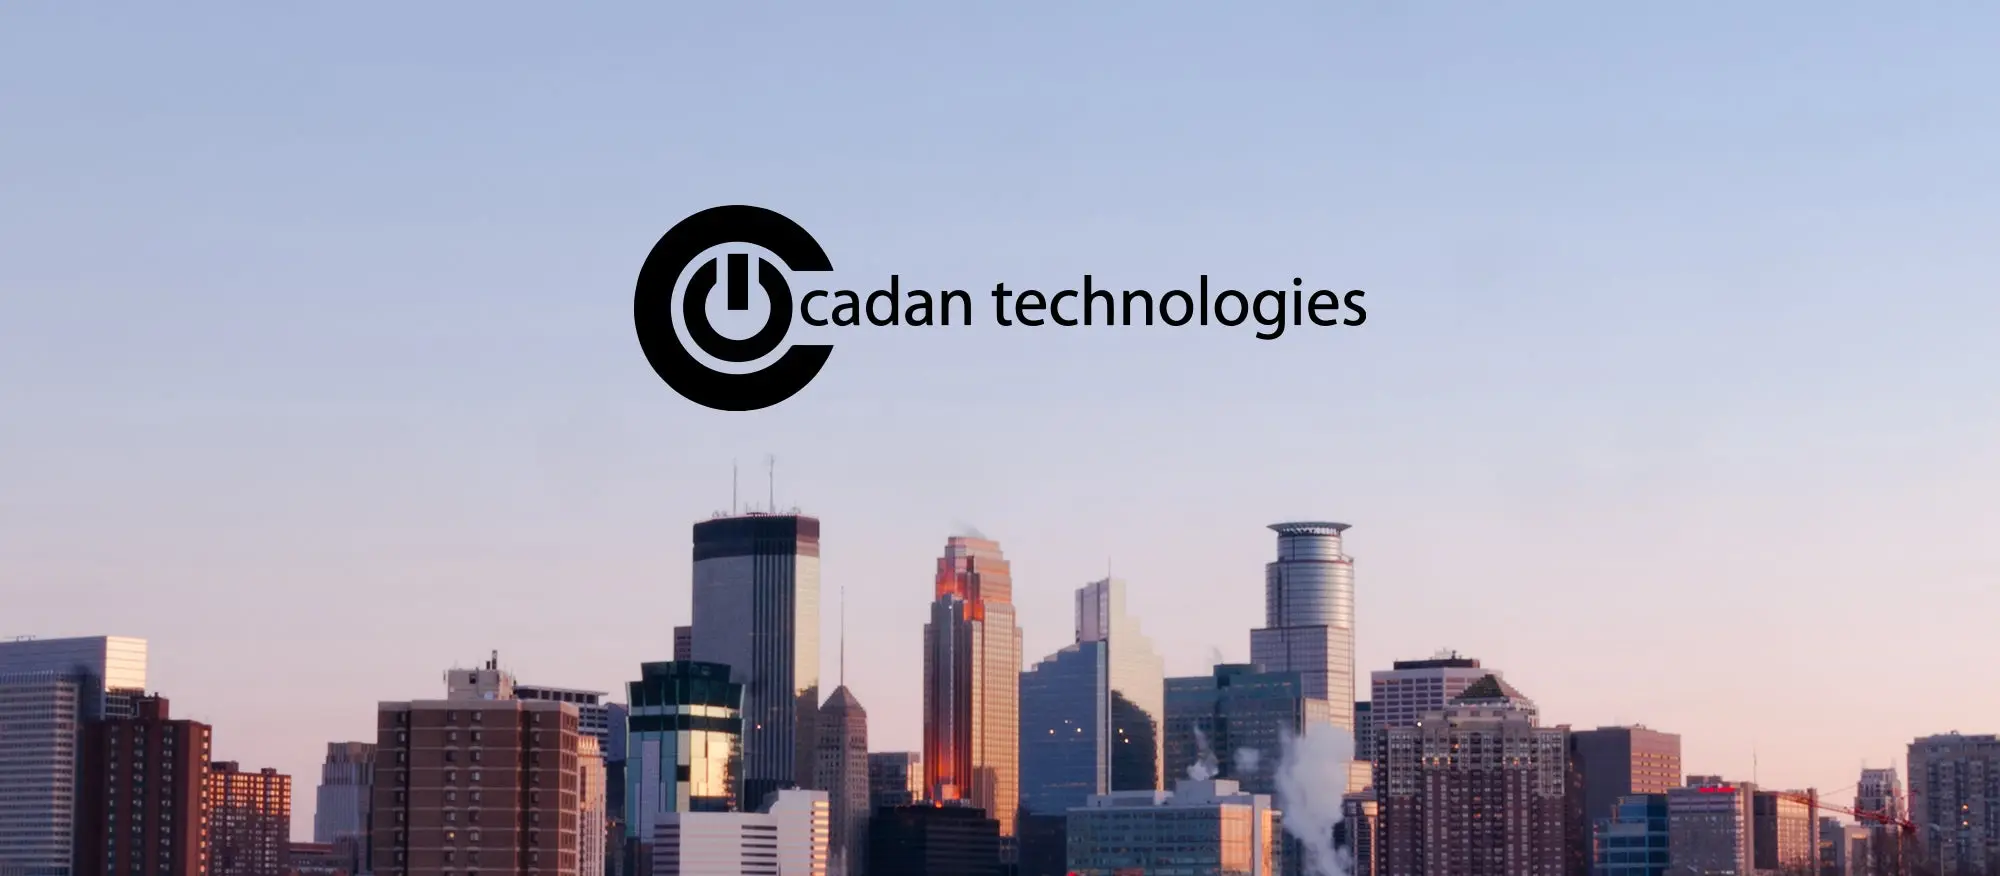 Illustration of a cityscape with Cadan technologies written on the center. 